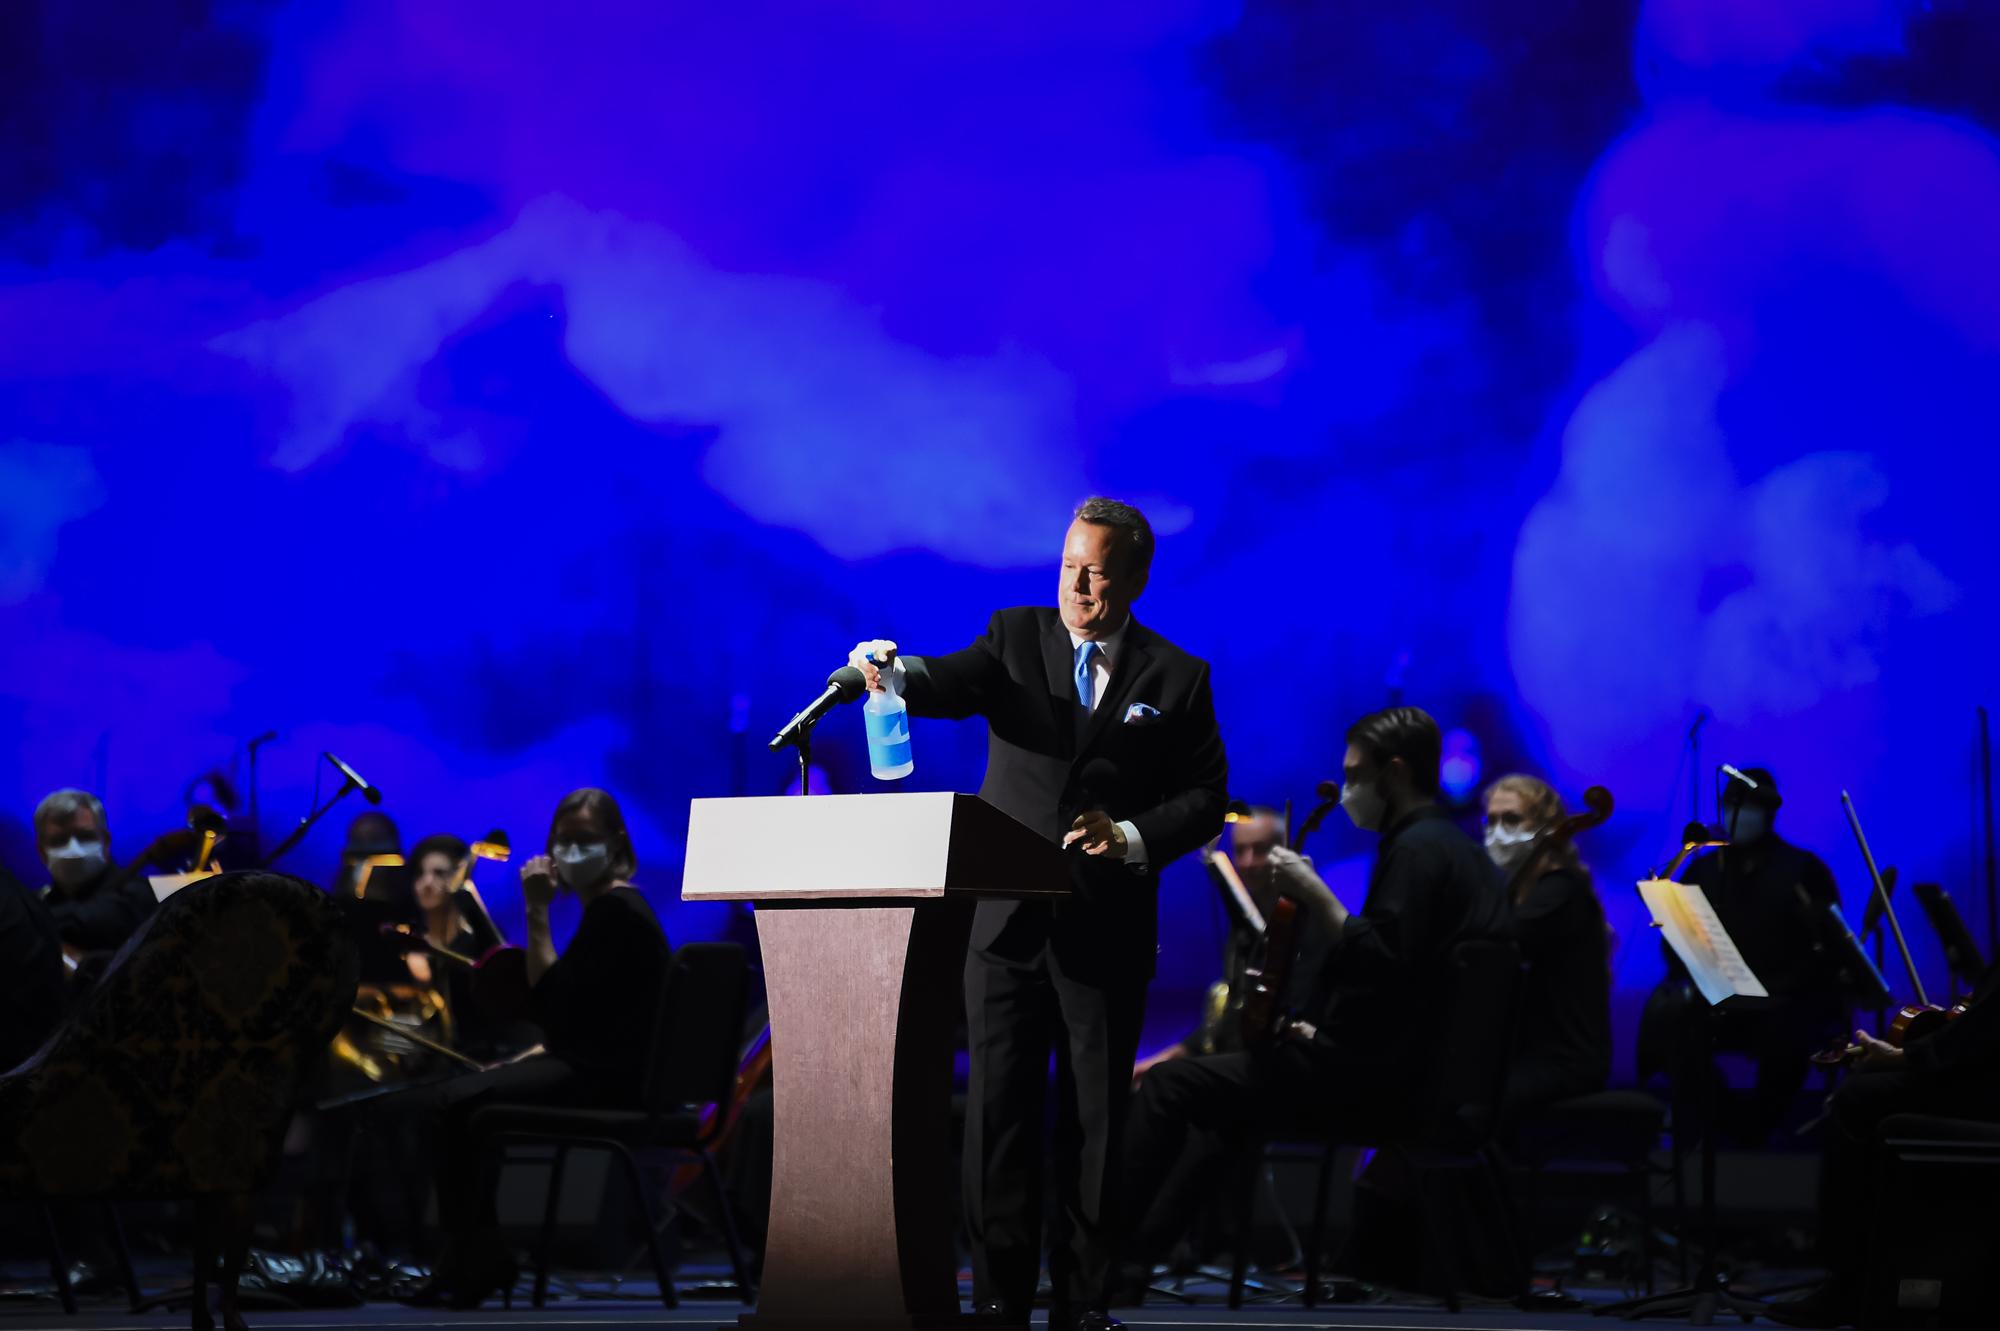 Palm Beach Opera reopens - The host sanitizes the microphone during the opening...